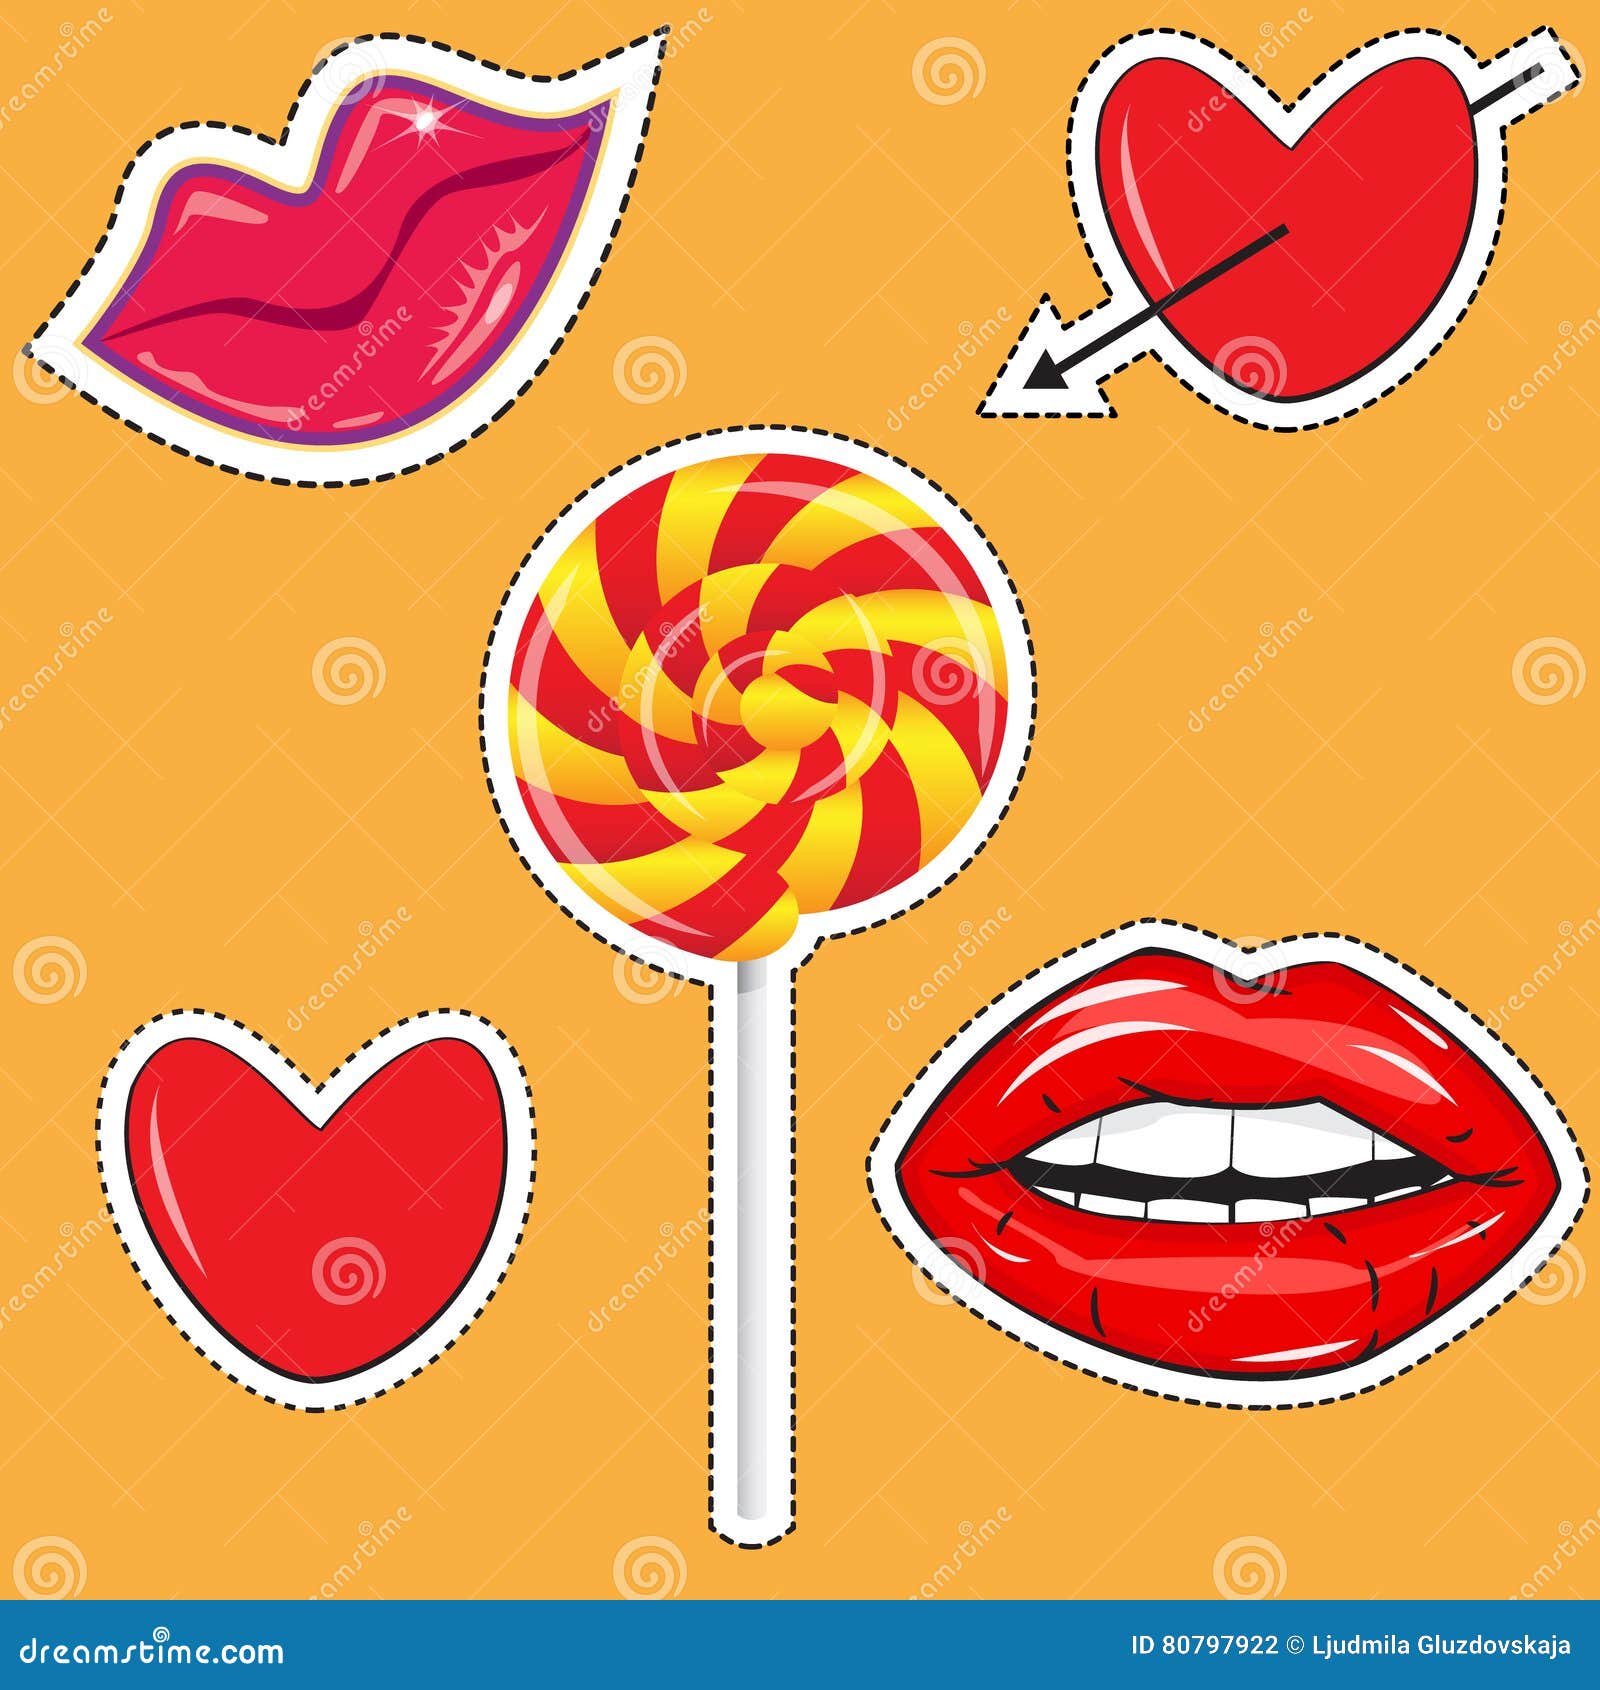 Fashionable stickers with the image of hearts, bright lips and sweet caramel, Vector illustration on white background. Set of stickers, pins, patches in the cartoon of the 80s-90s comic style.